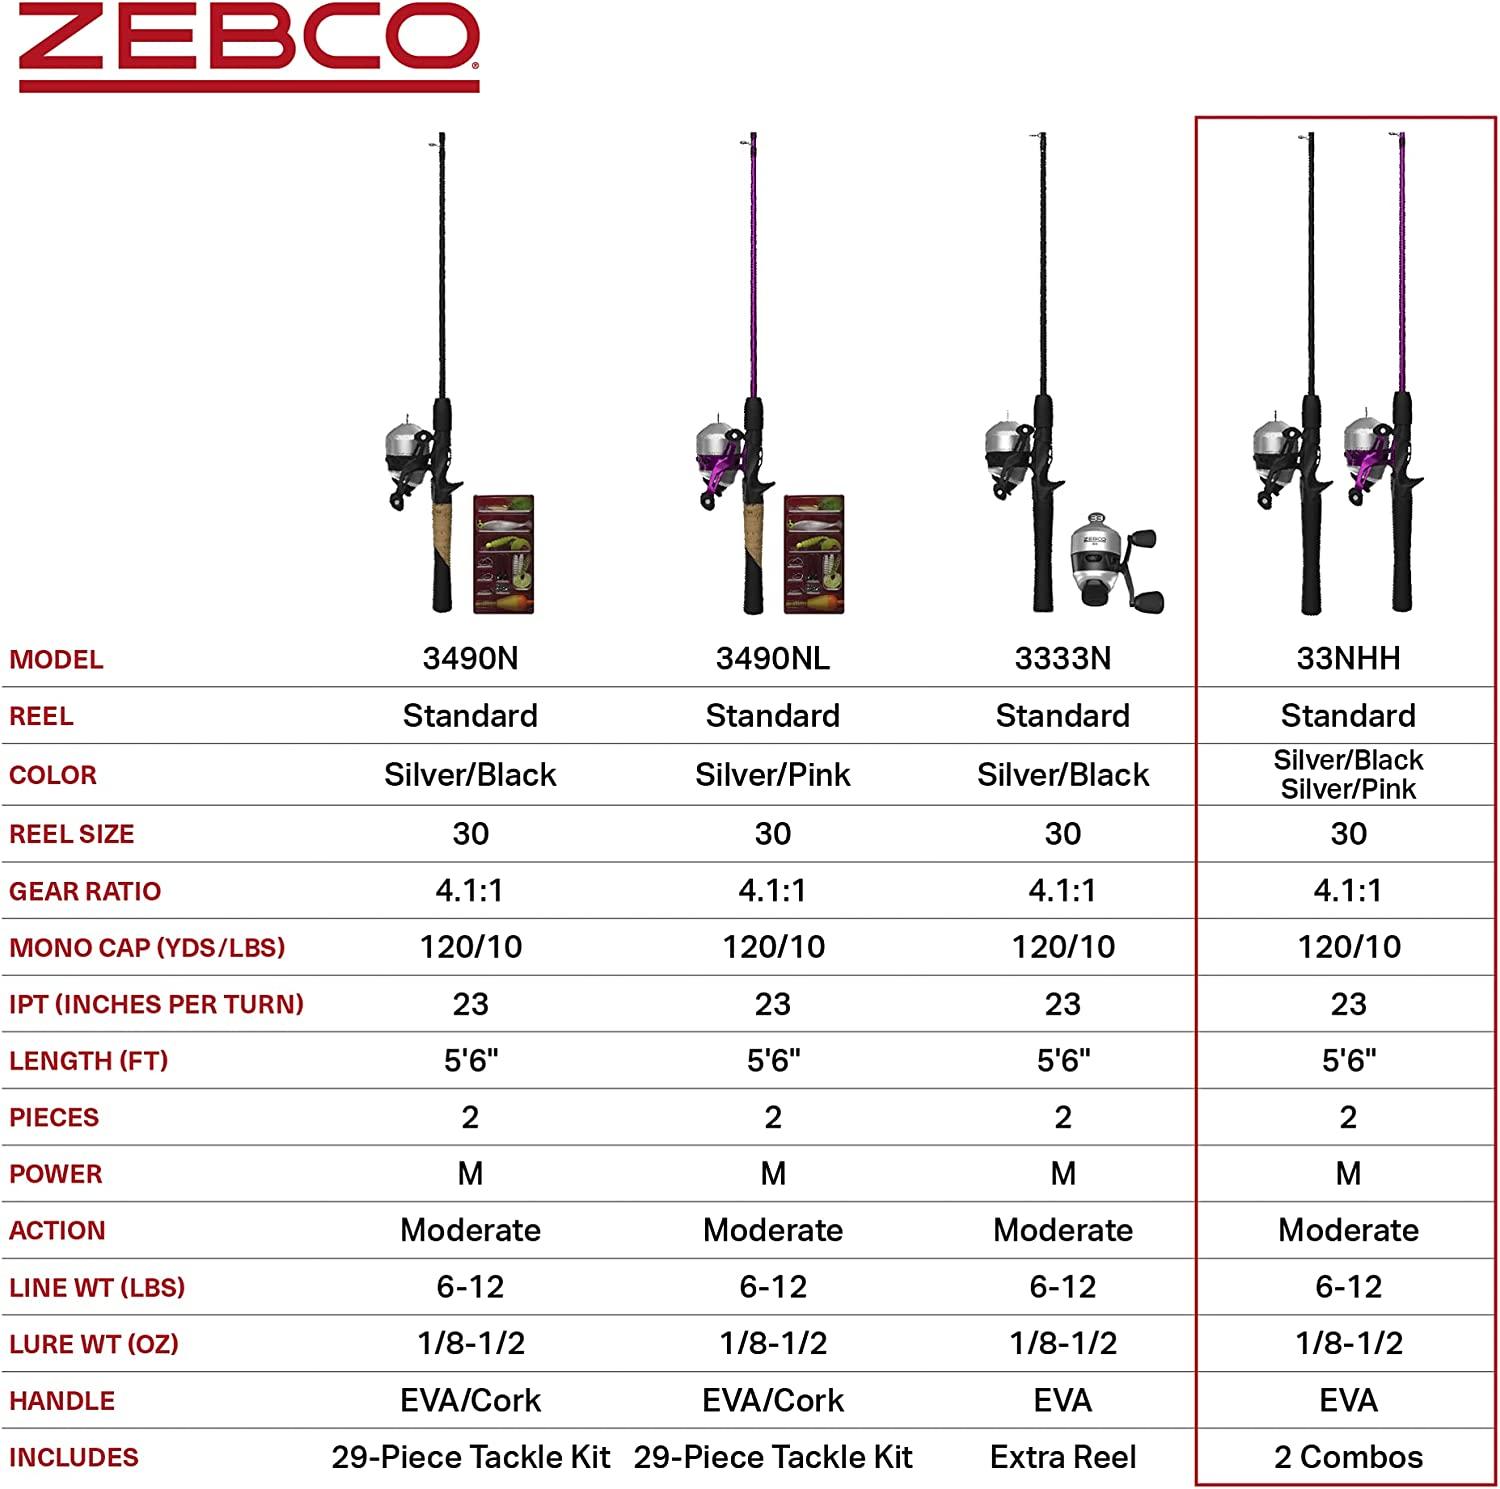 Zebco 33 Spincast Reel and Fishing Rod Combo, 6-Foot 2-Piece 30